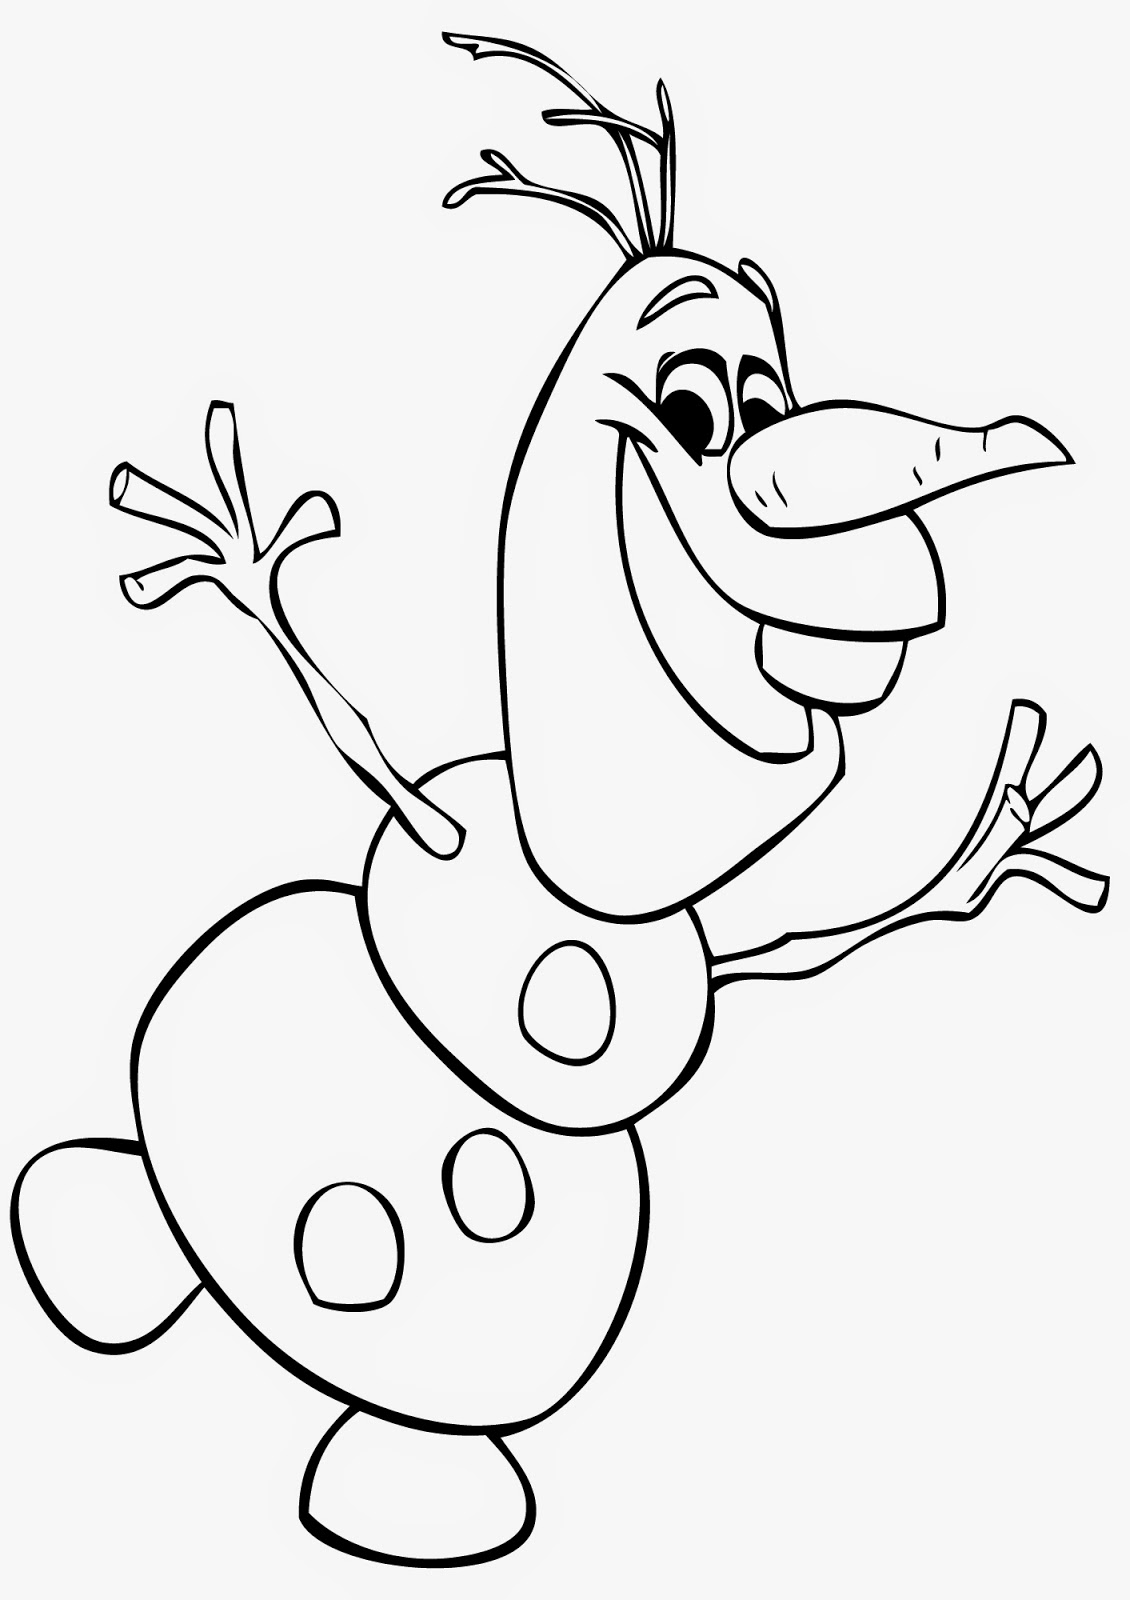 olaf from frozen coloring pages - photo #11